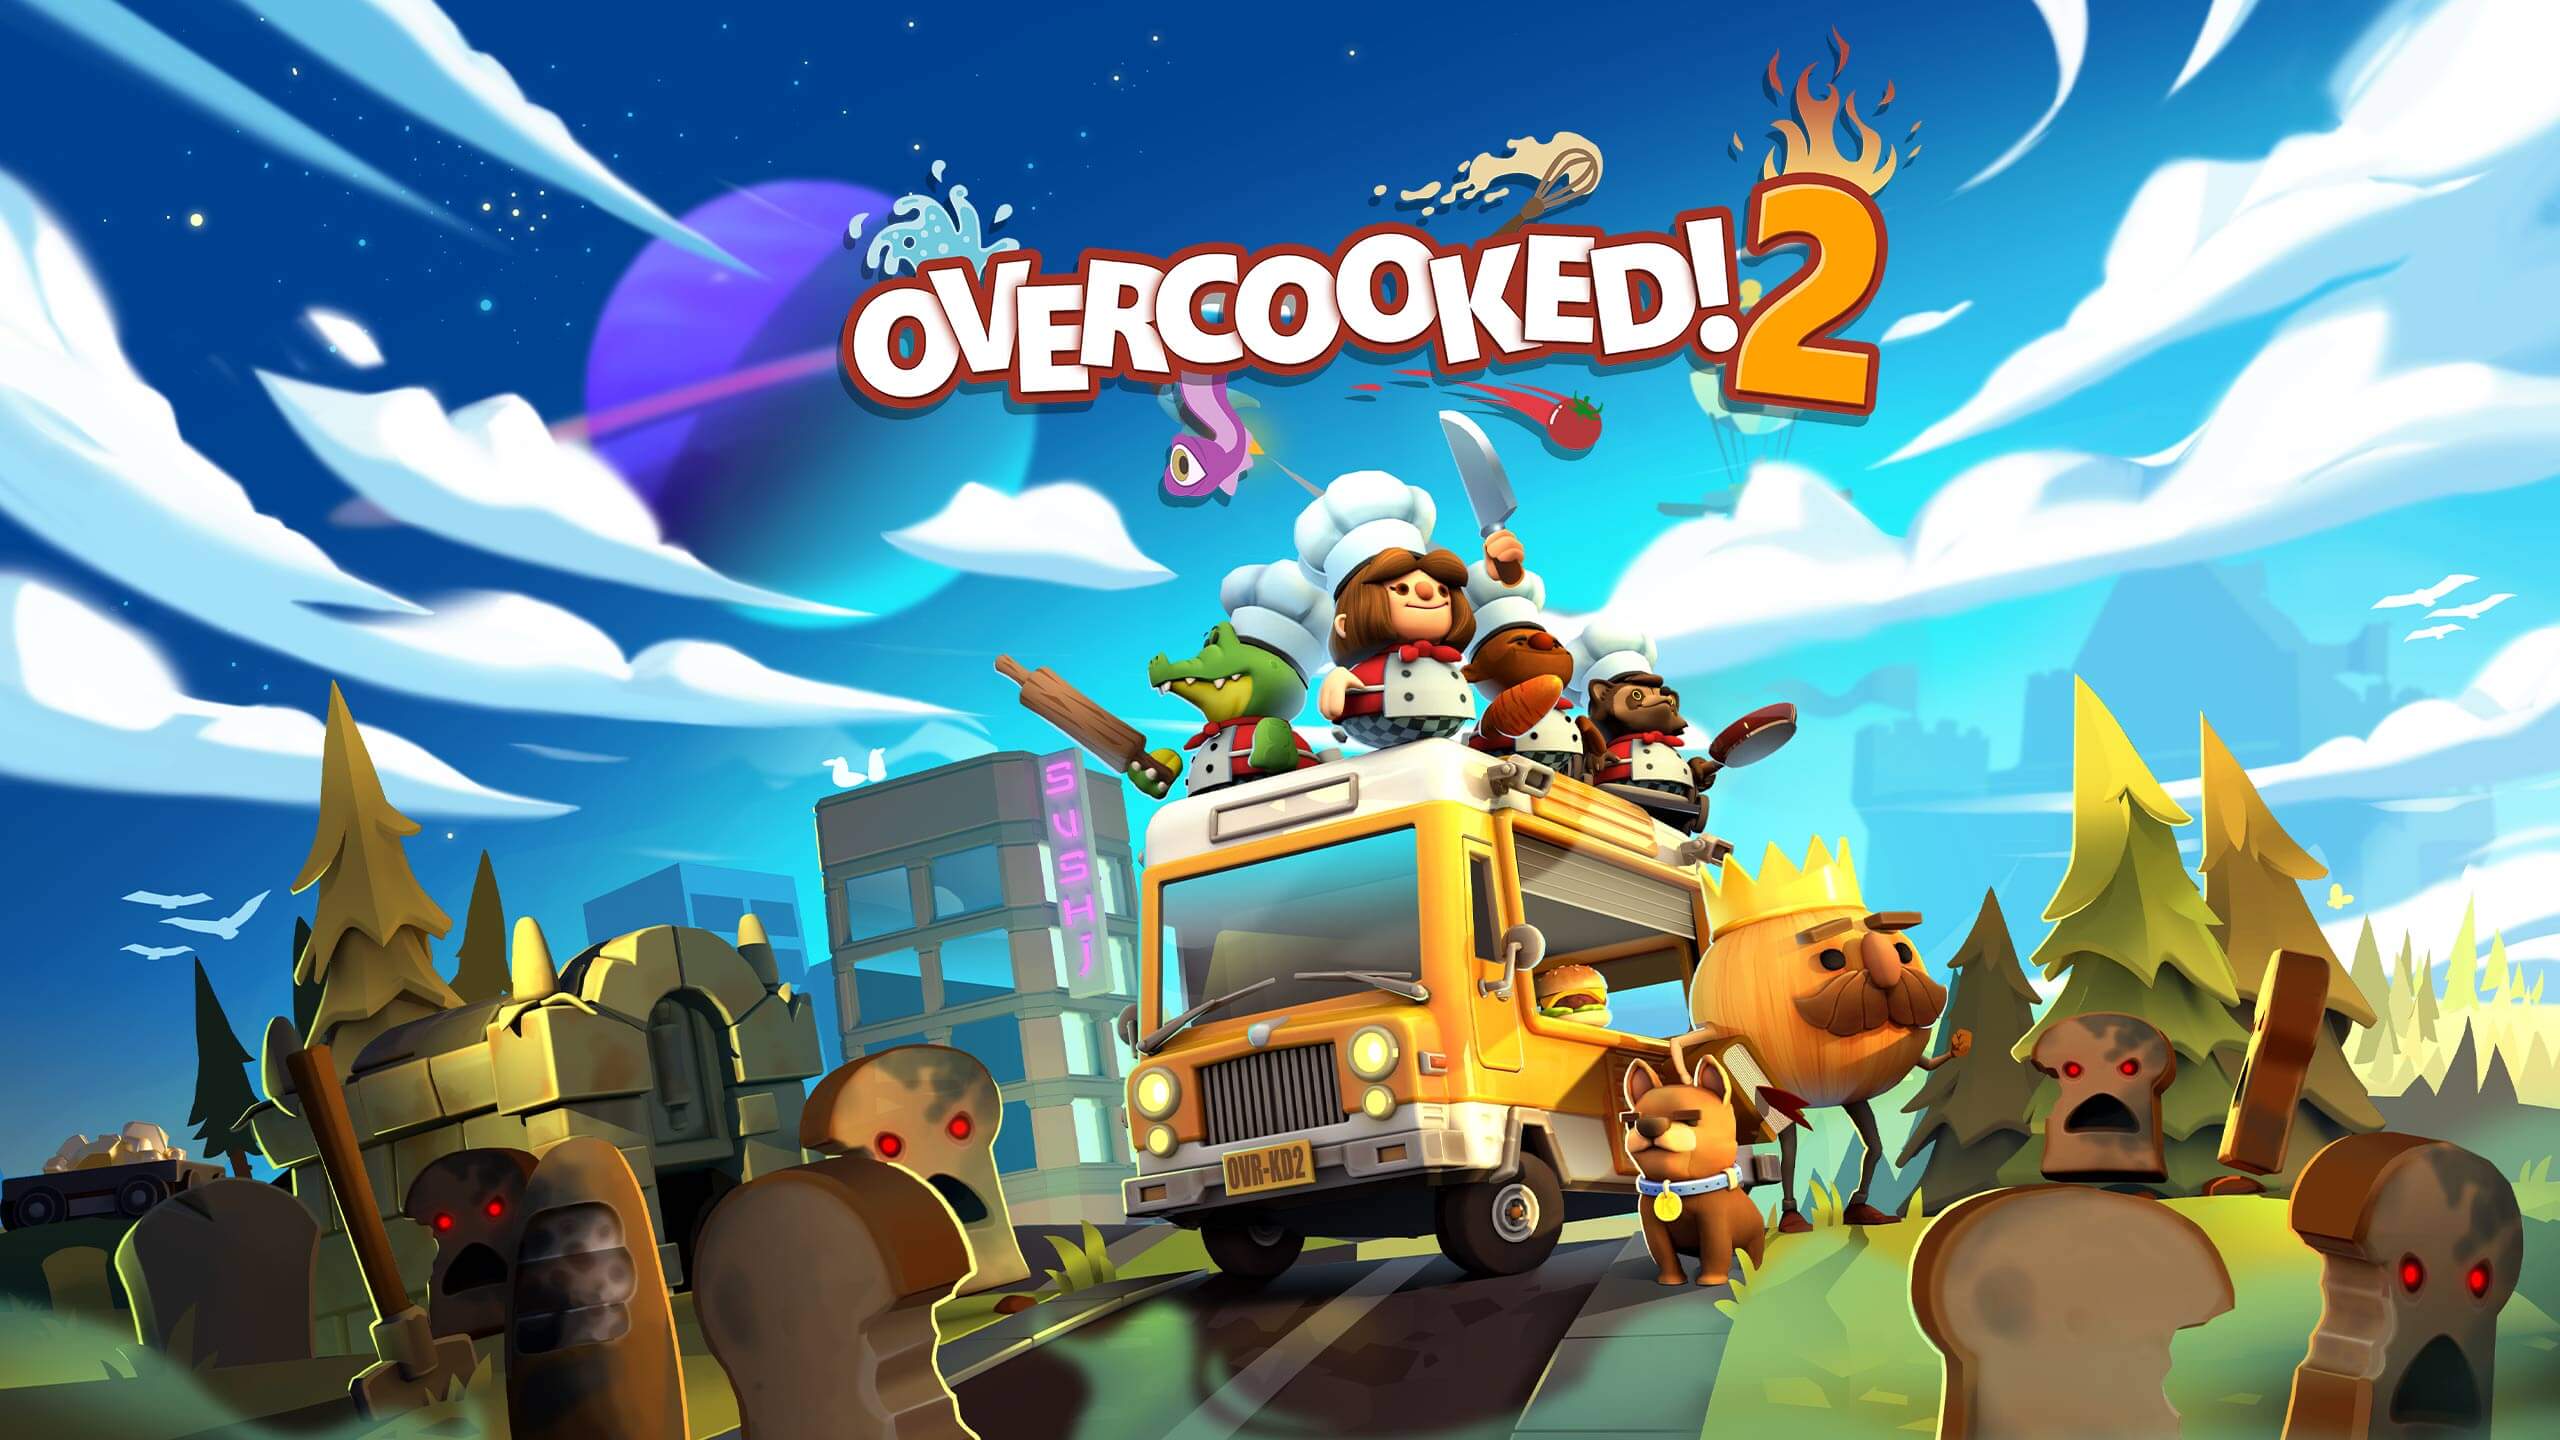 Overcooked! 2 PC Game Latest Version Free Download